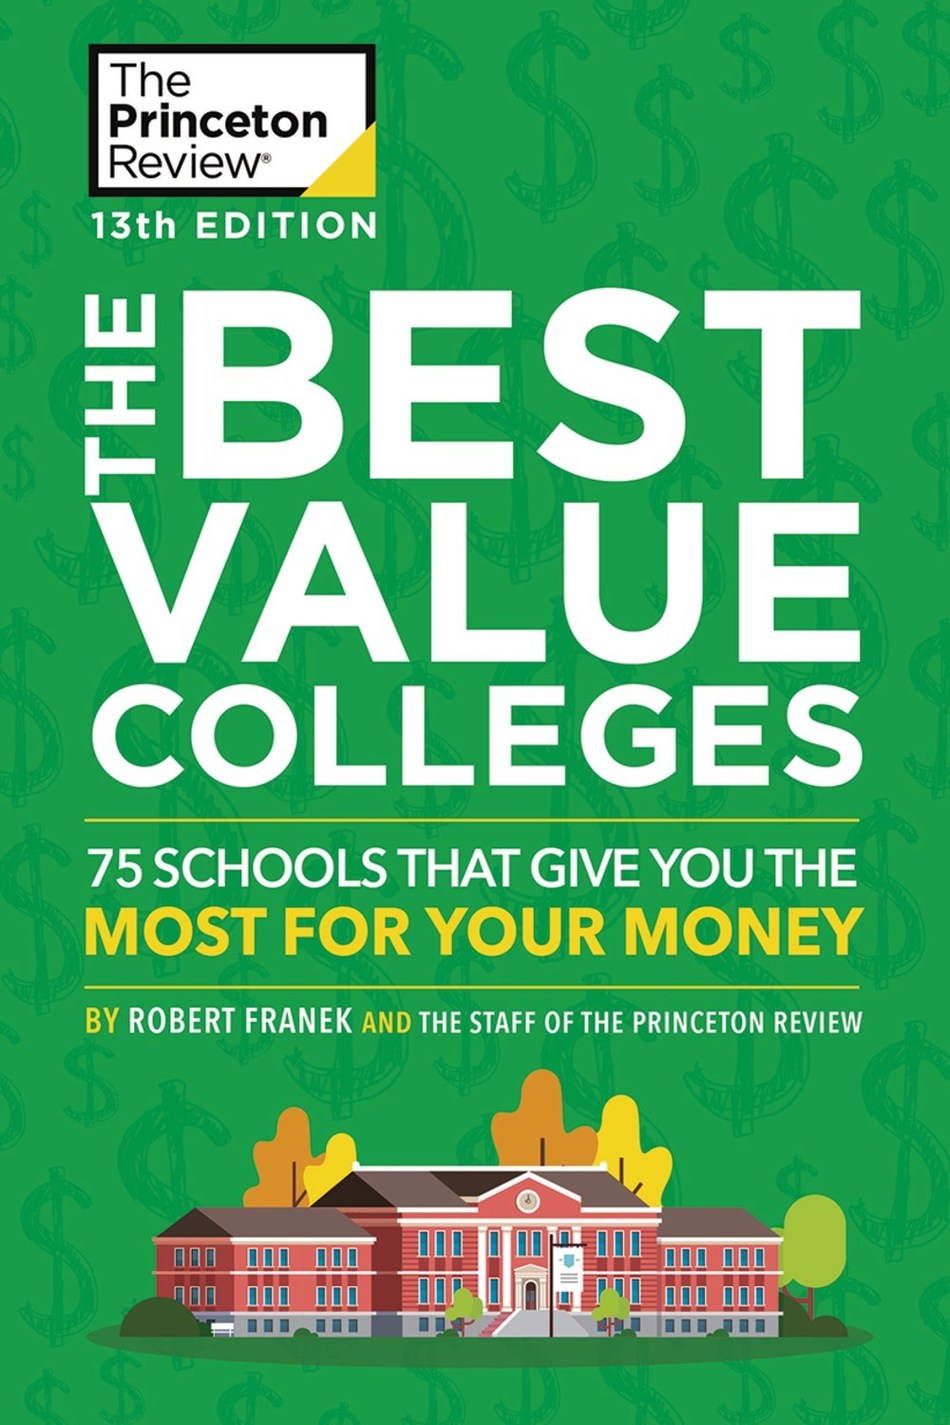 The Princeton Review Has Released Its "Best Value Colleges" List and